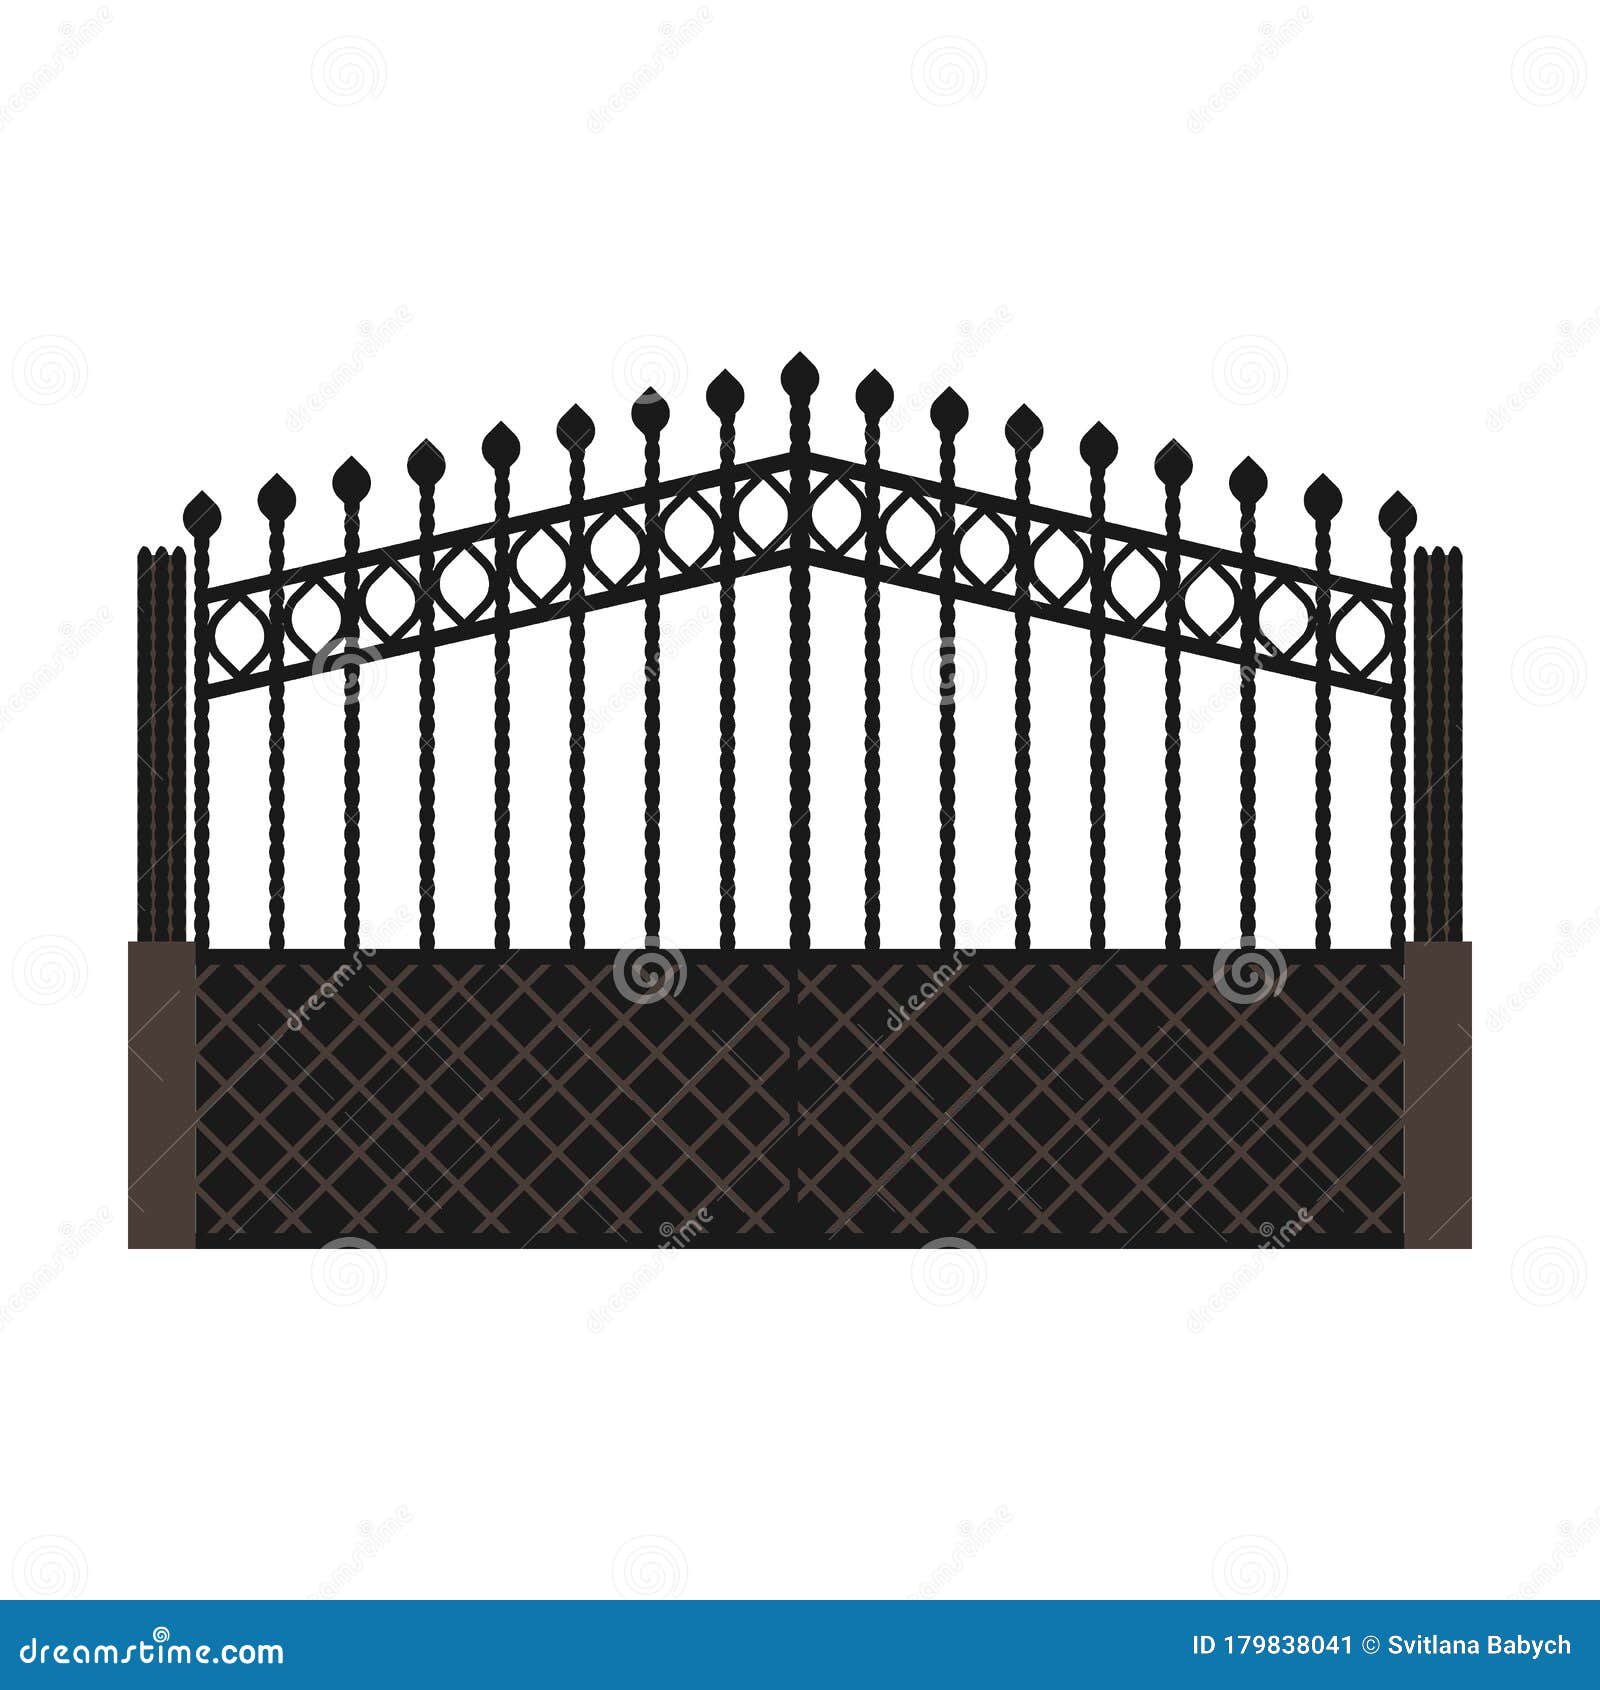 Fence Gate Vector  Vector Icon Isolated on White Background  Fence Gate. Stock Vector - Illustration of lattice, construction: 179838041